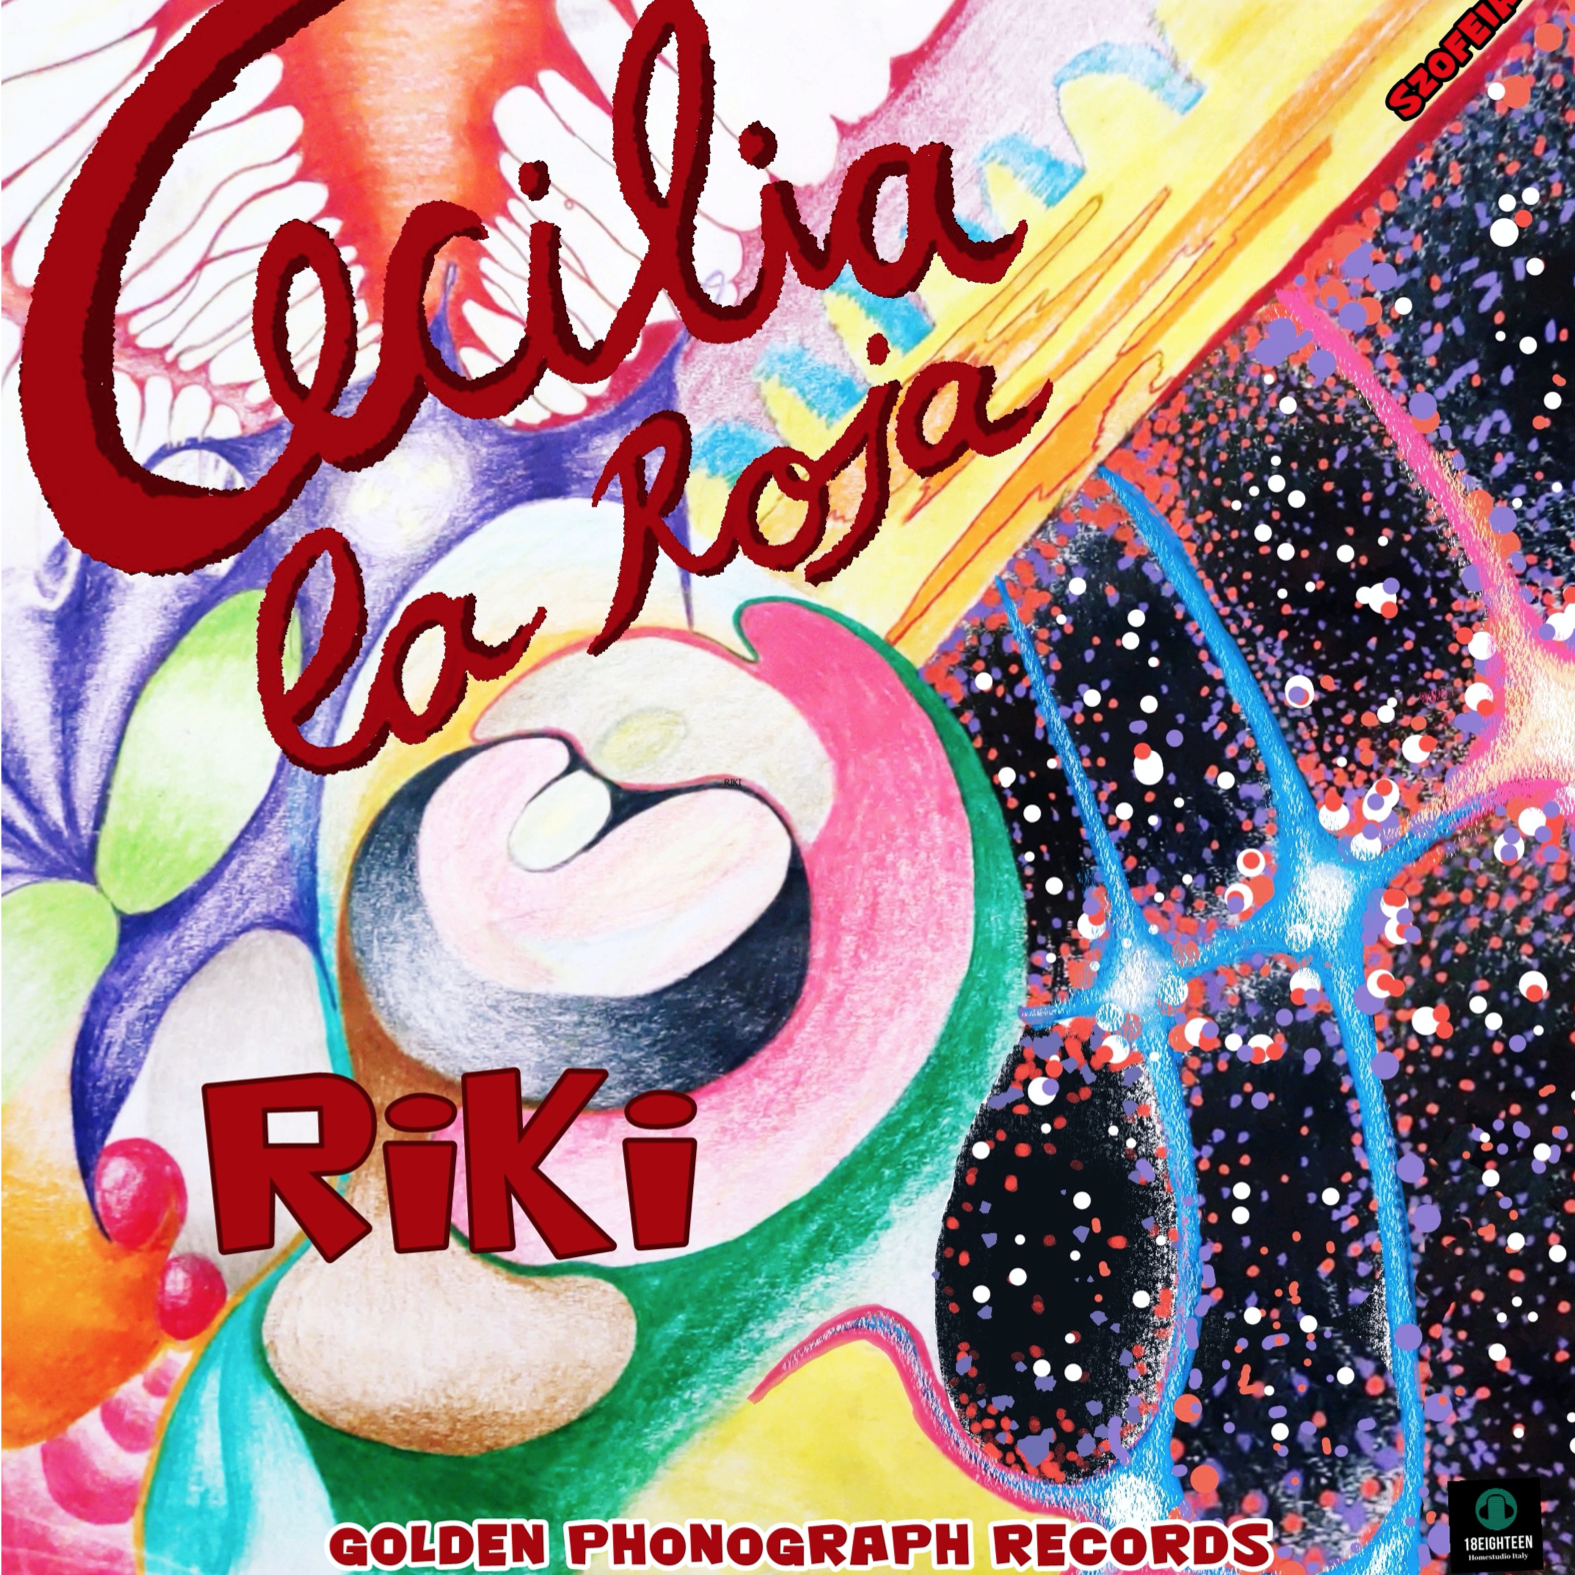 RIKI the latest song by CECILIA LA ROJA from November 12th 2021 on Spotify and all the Digital Music Streaming Services